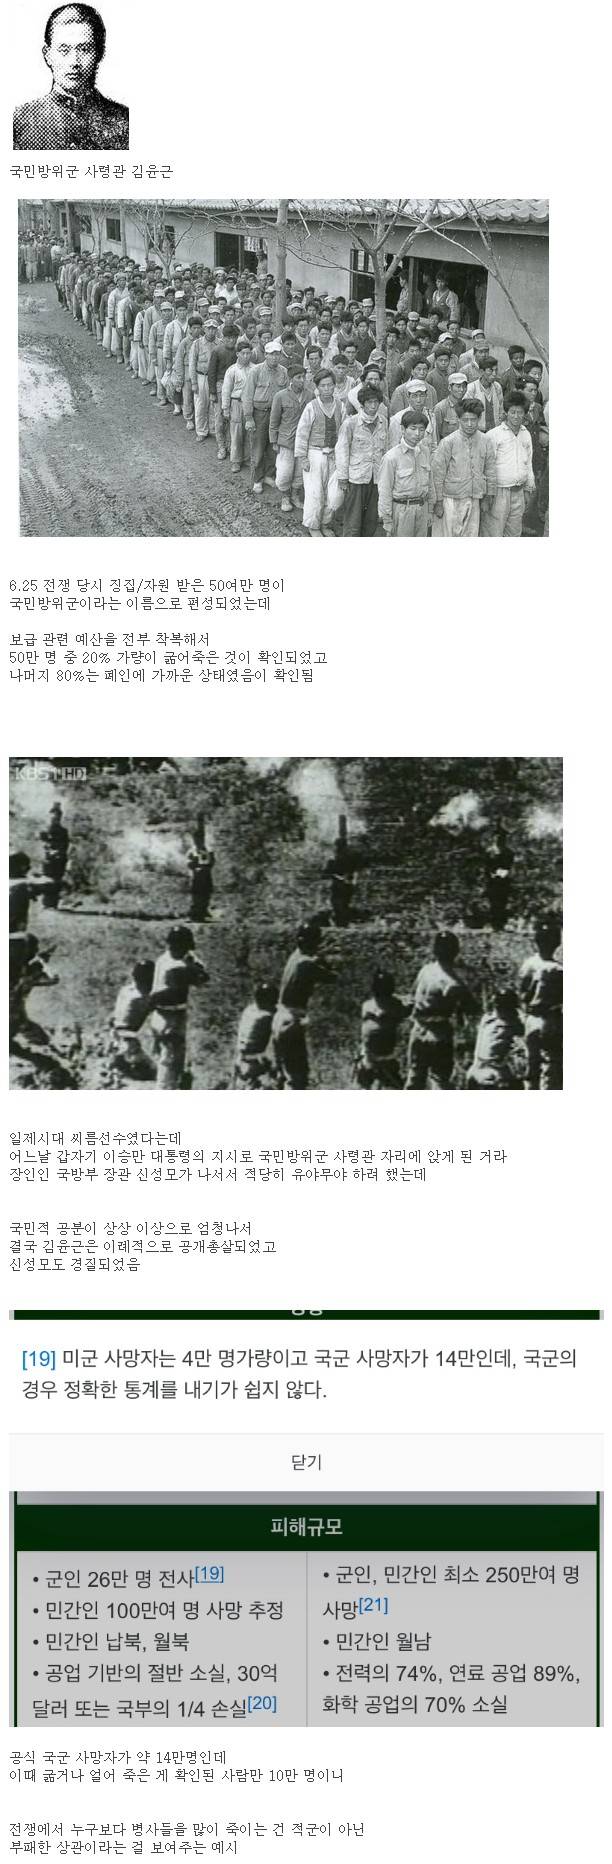 Who killed the most Korean soldiers in the Korean War?